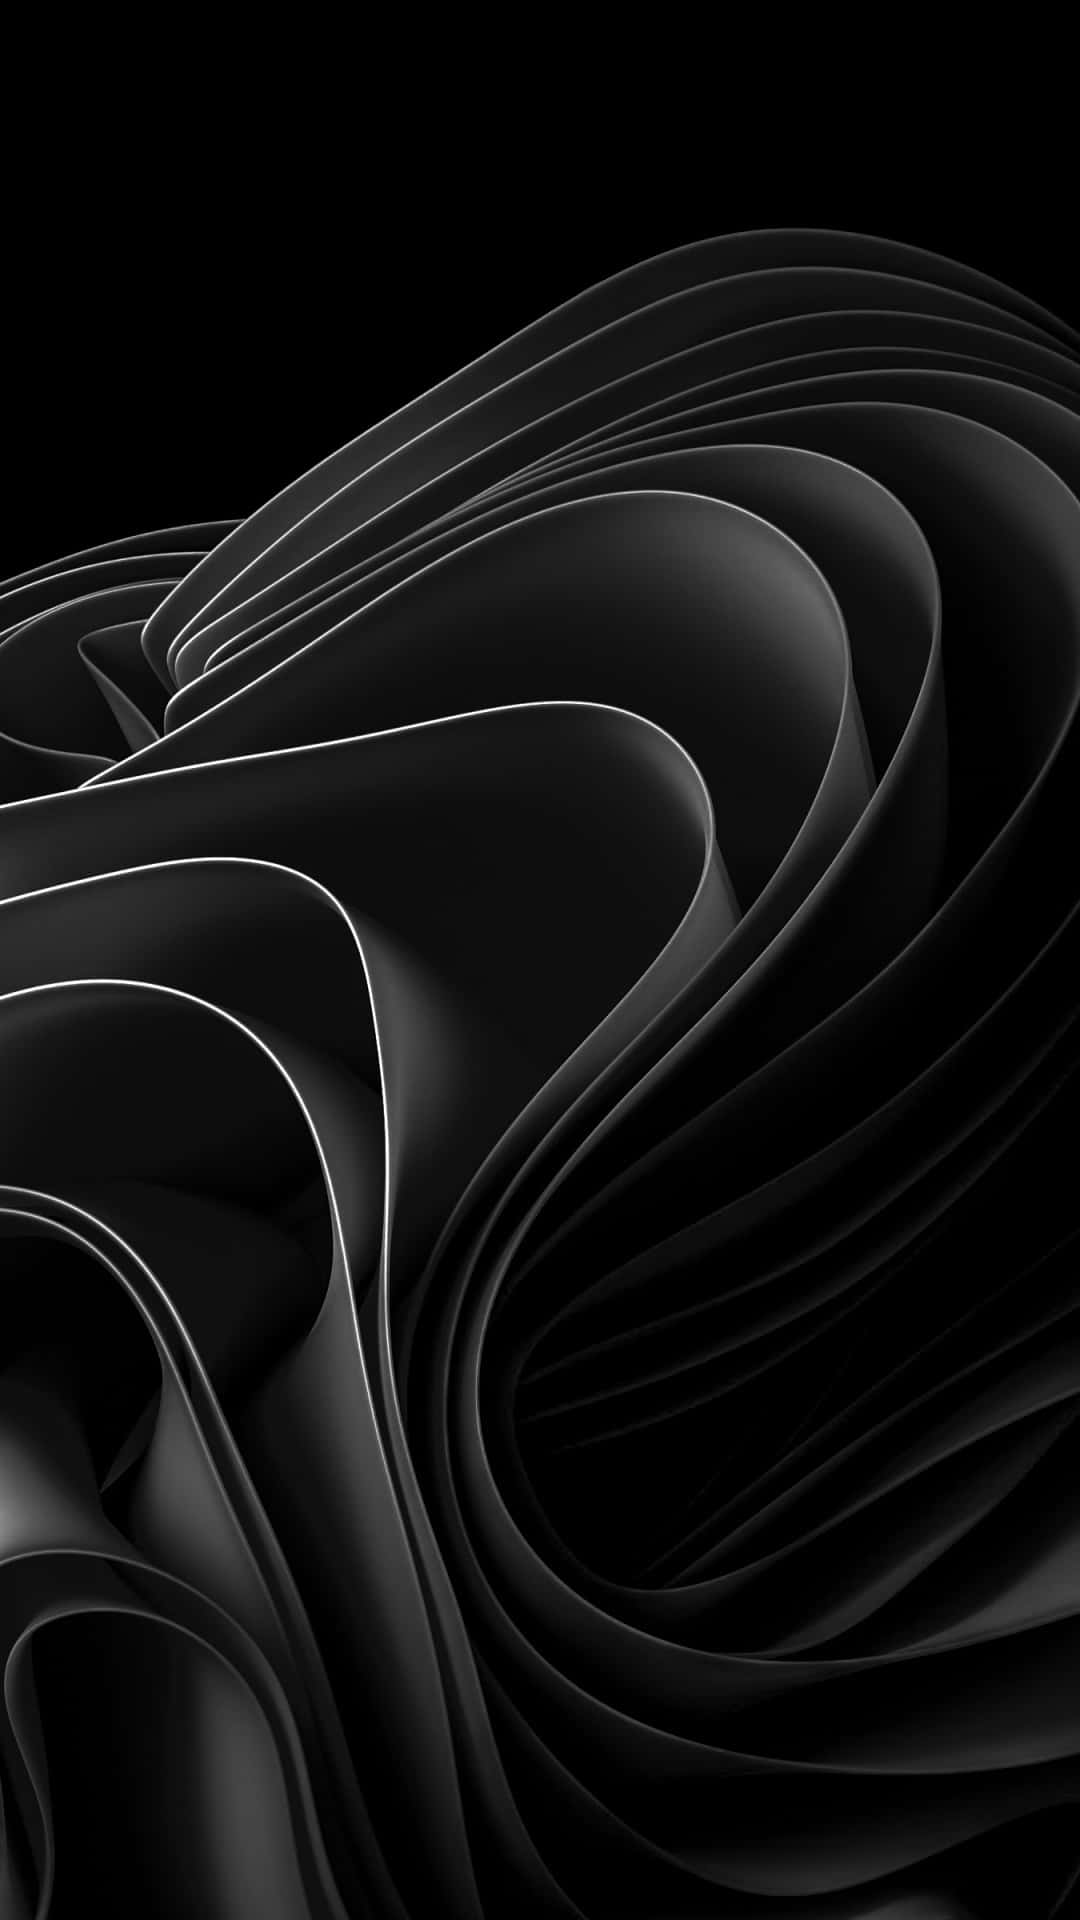 Download Black Abstract Wavy Pattern On Black Background | Wallpapers.com